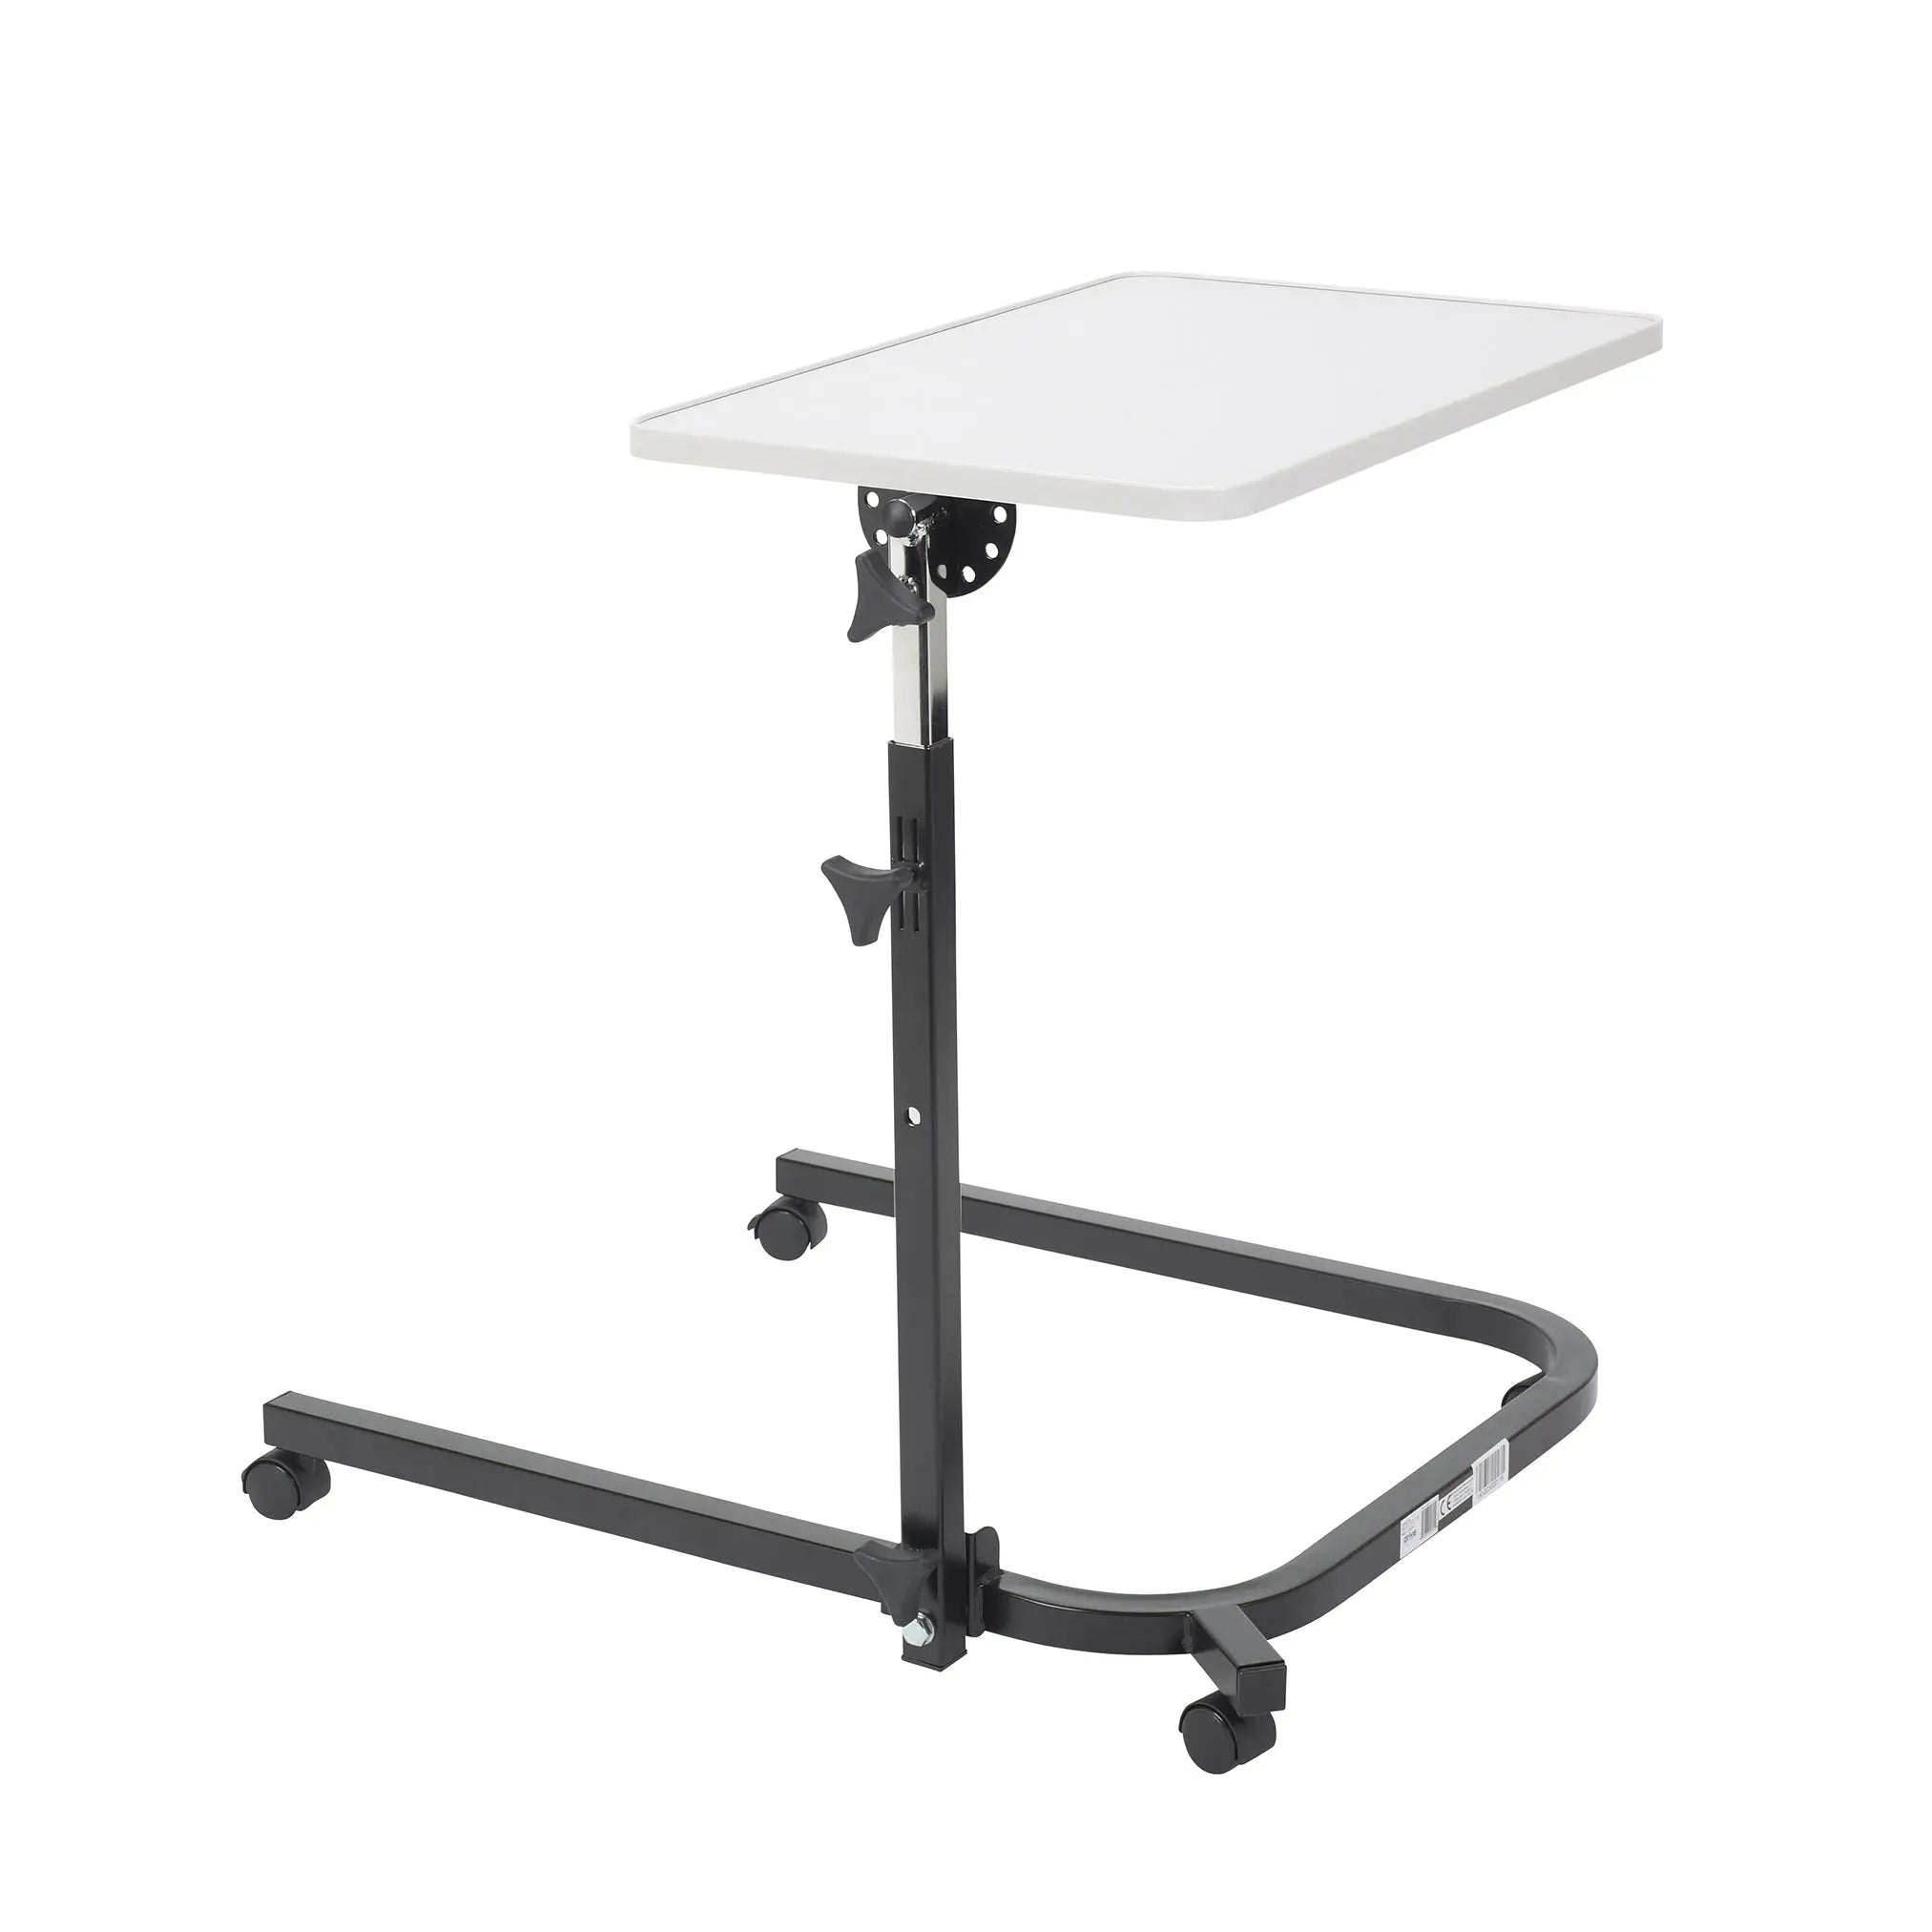 Pivot and Tilt Adjustable Overbed Table Tray - Home Health Store Inc